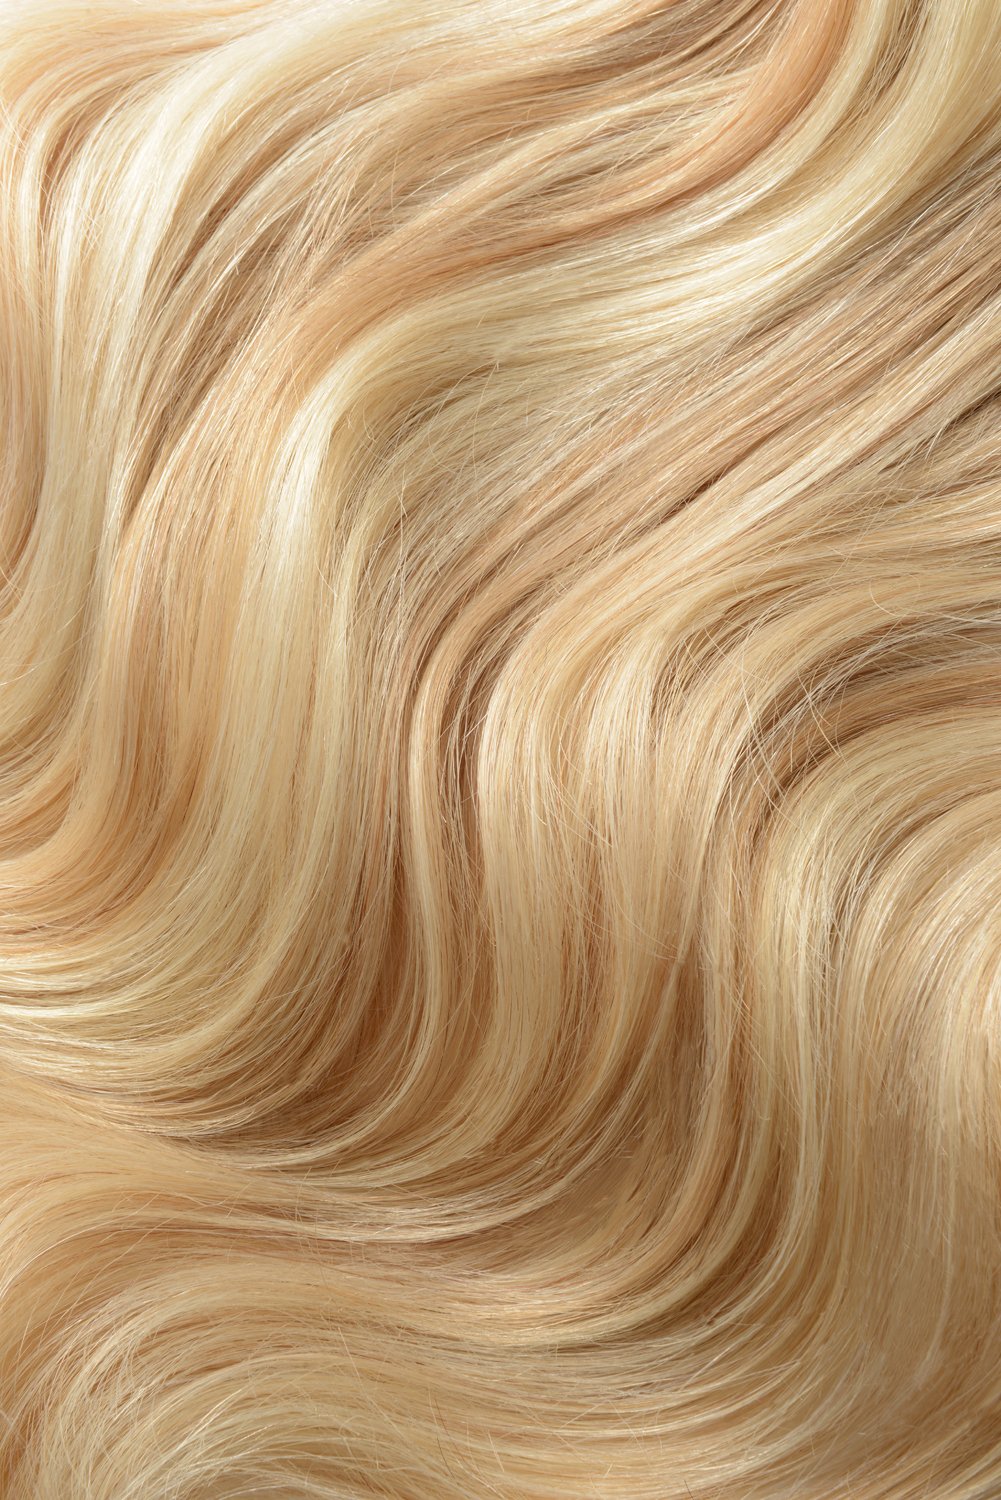 Double Wefted Full Head Remy Clip in Human Hair Extensions - Peaches & Cream (#27/613)